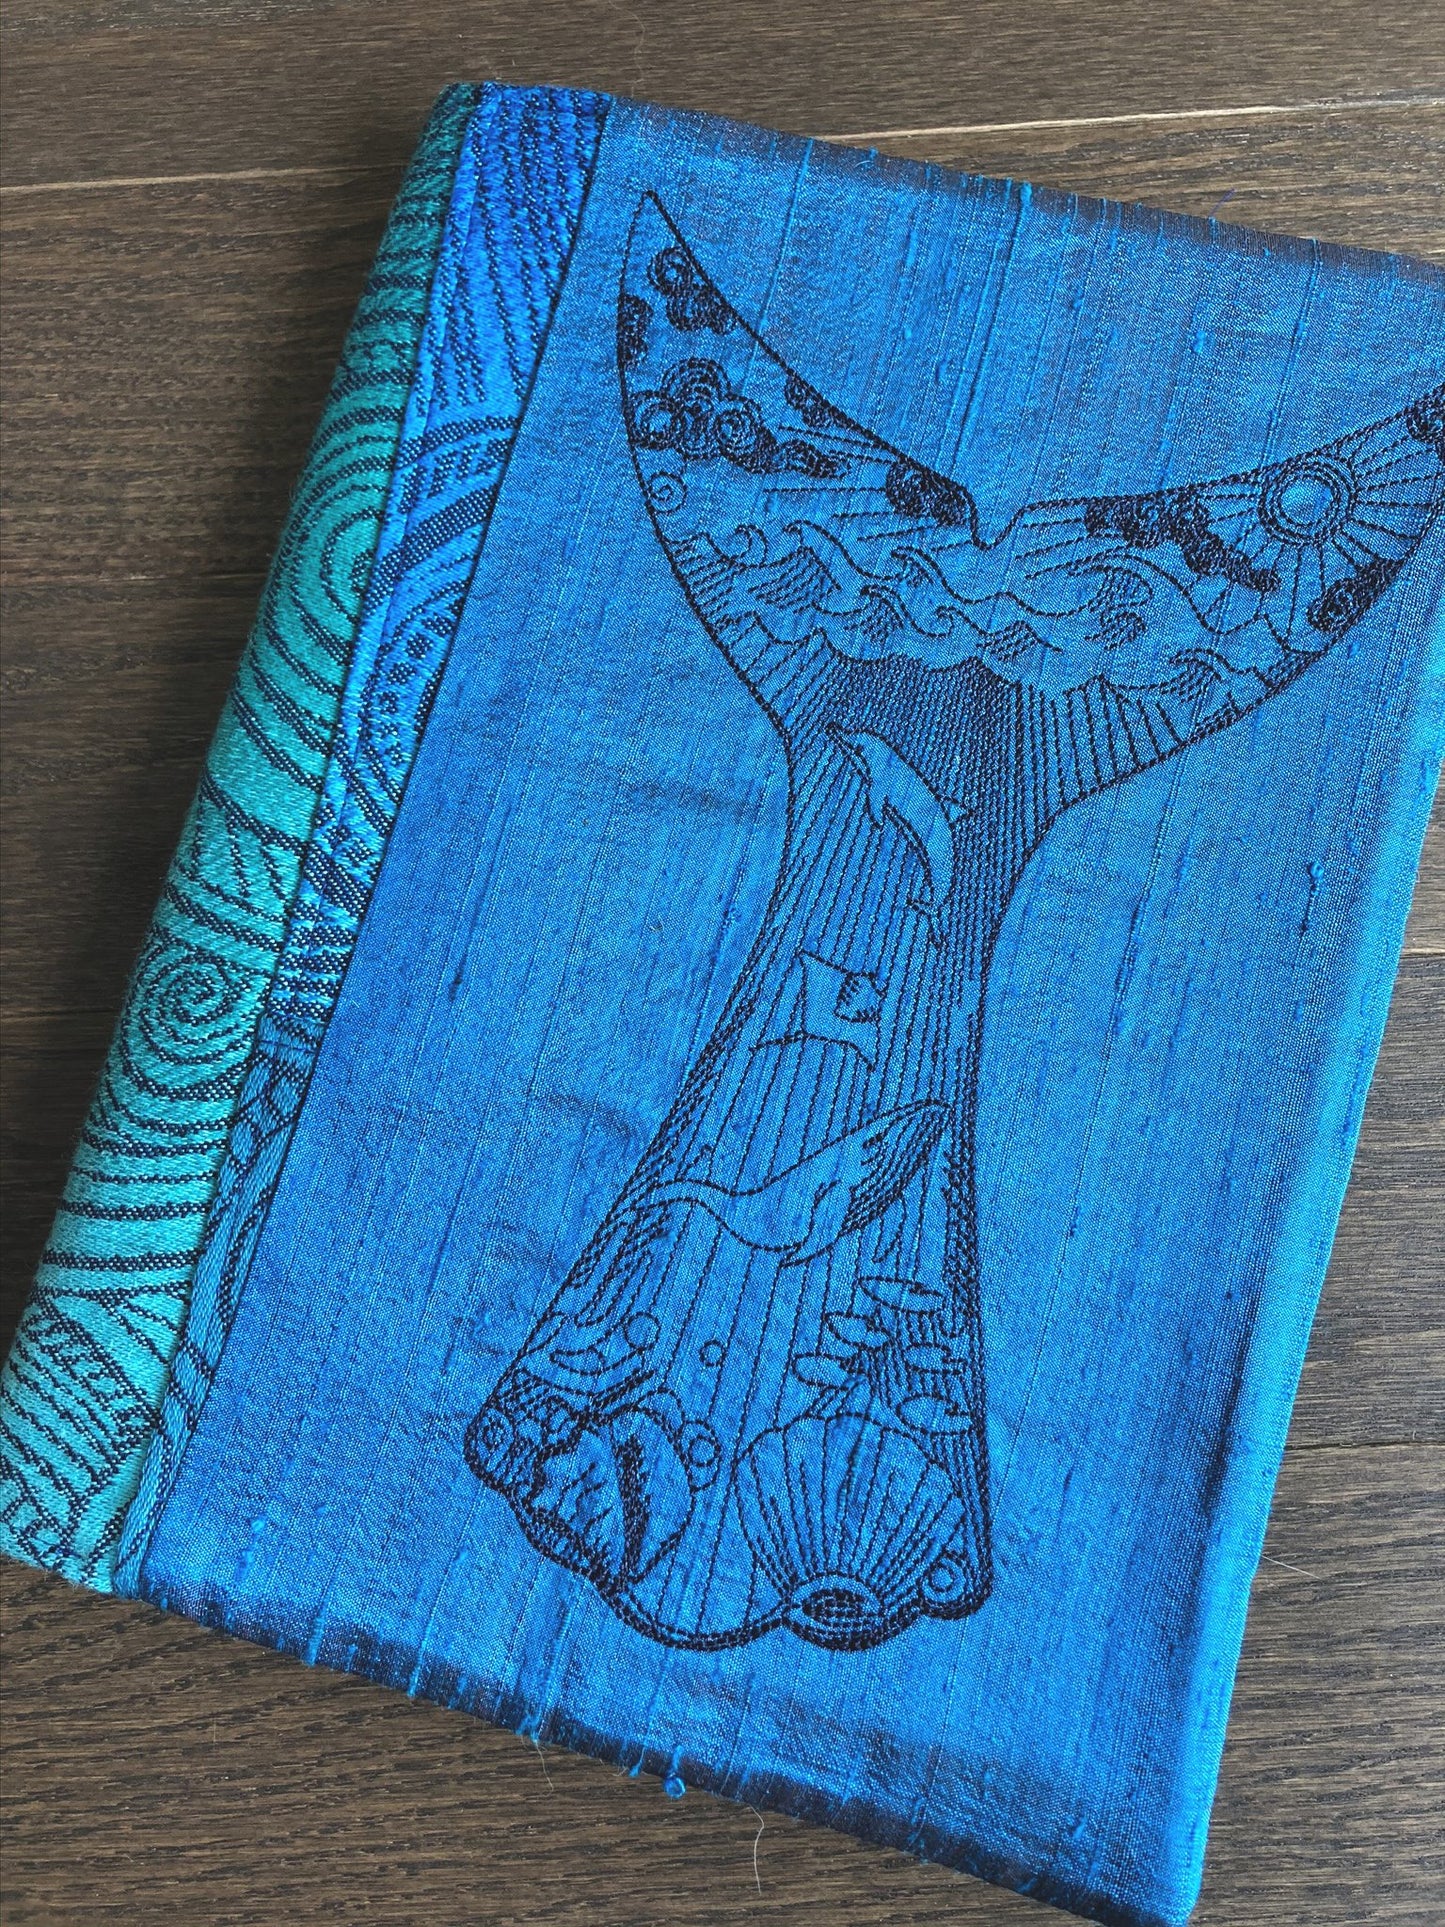 Whale Tale Journal and Notebook Cover